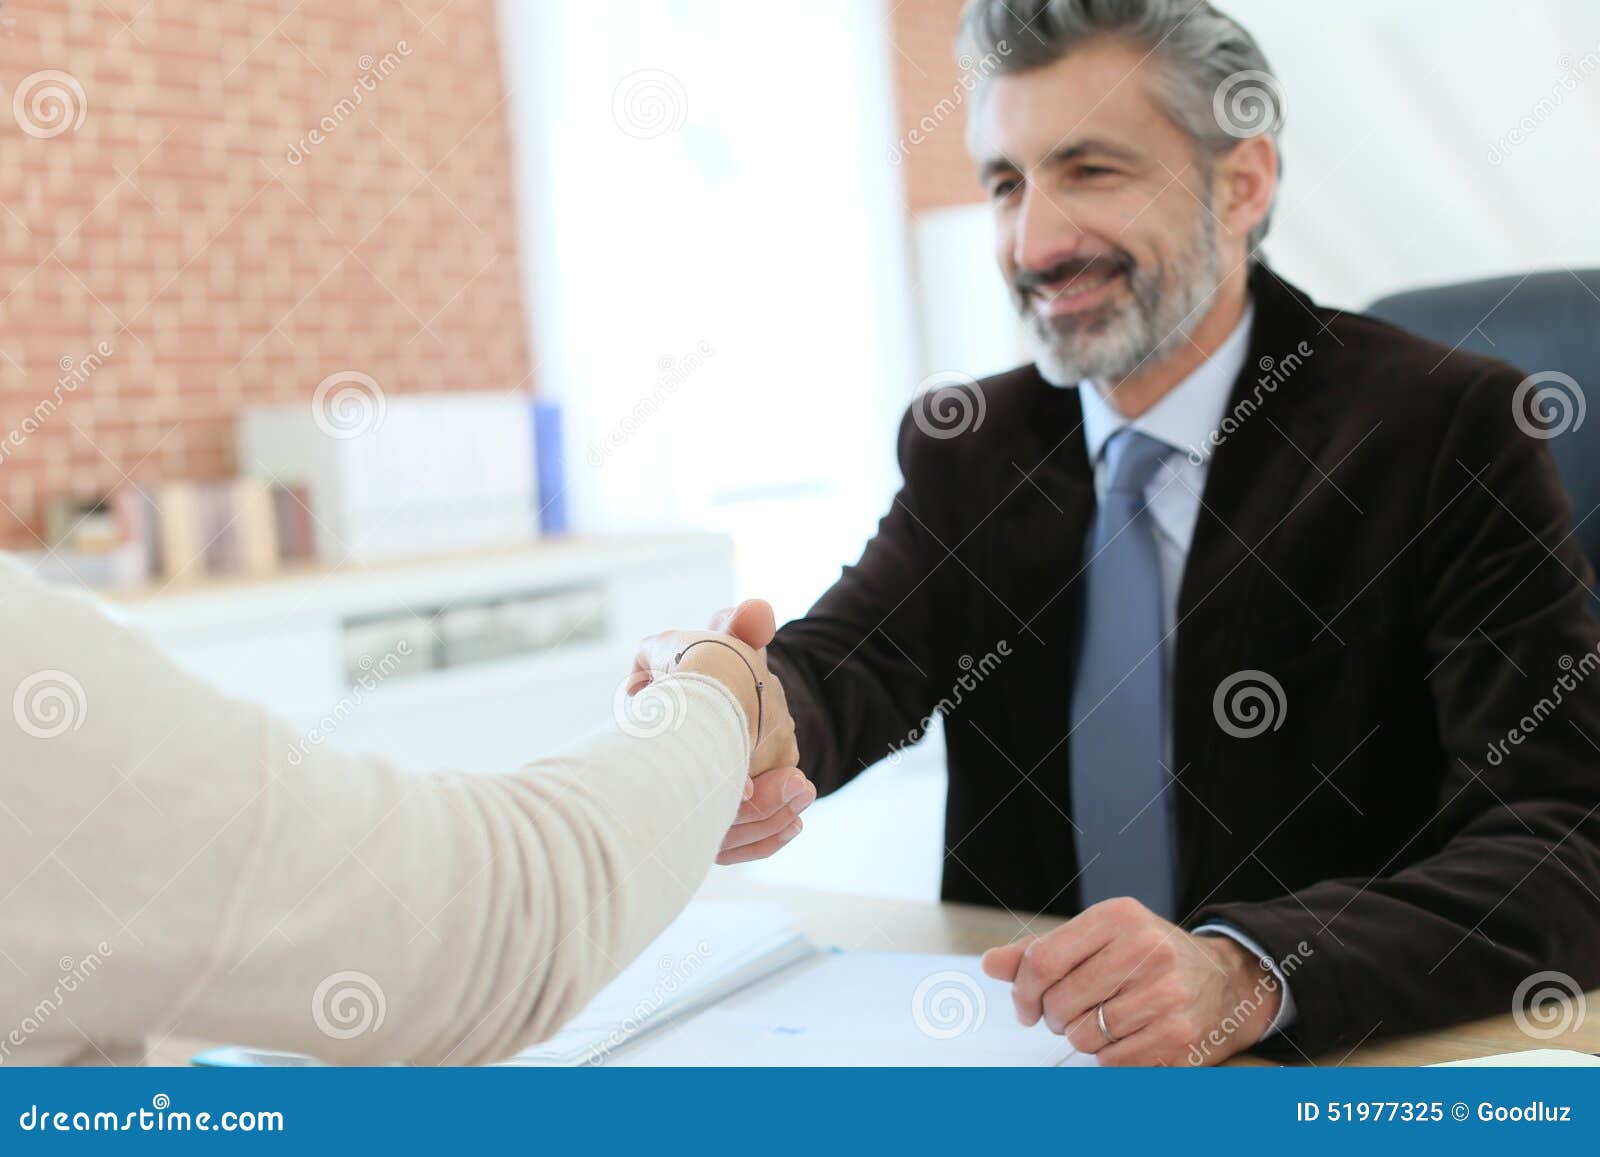 attorney and client handshaking